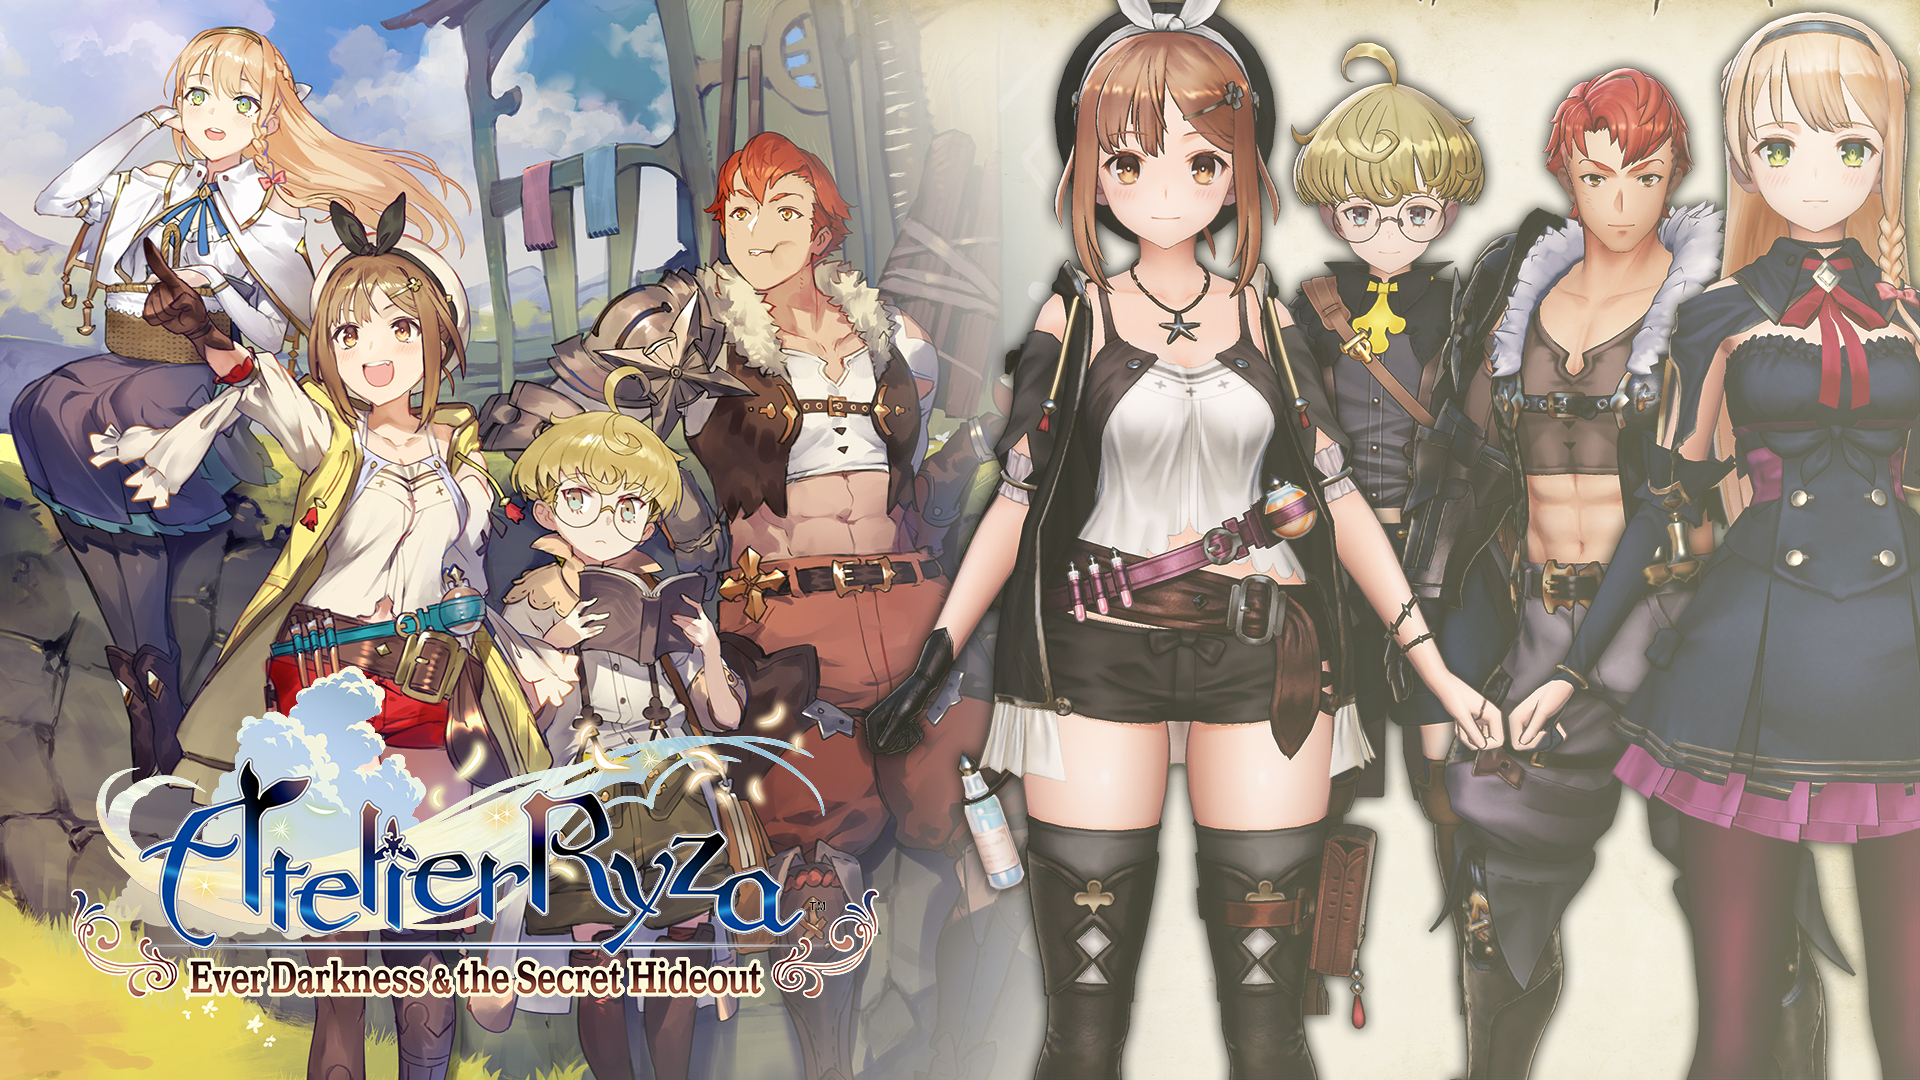 Costume Set "Another Fashion"/Atelier Ryza: Ever Darkness & t...